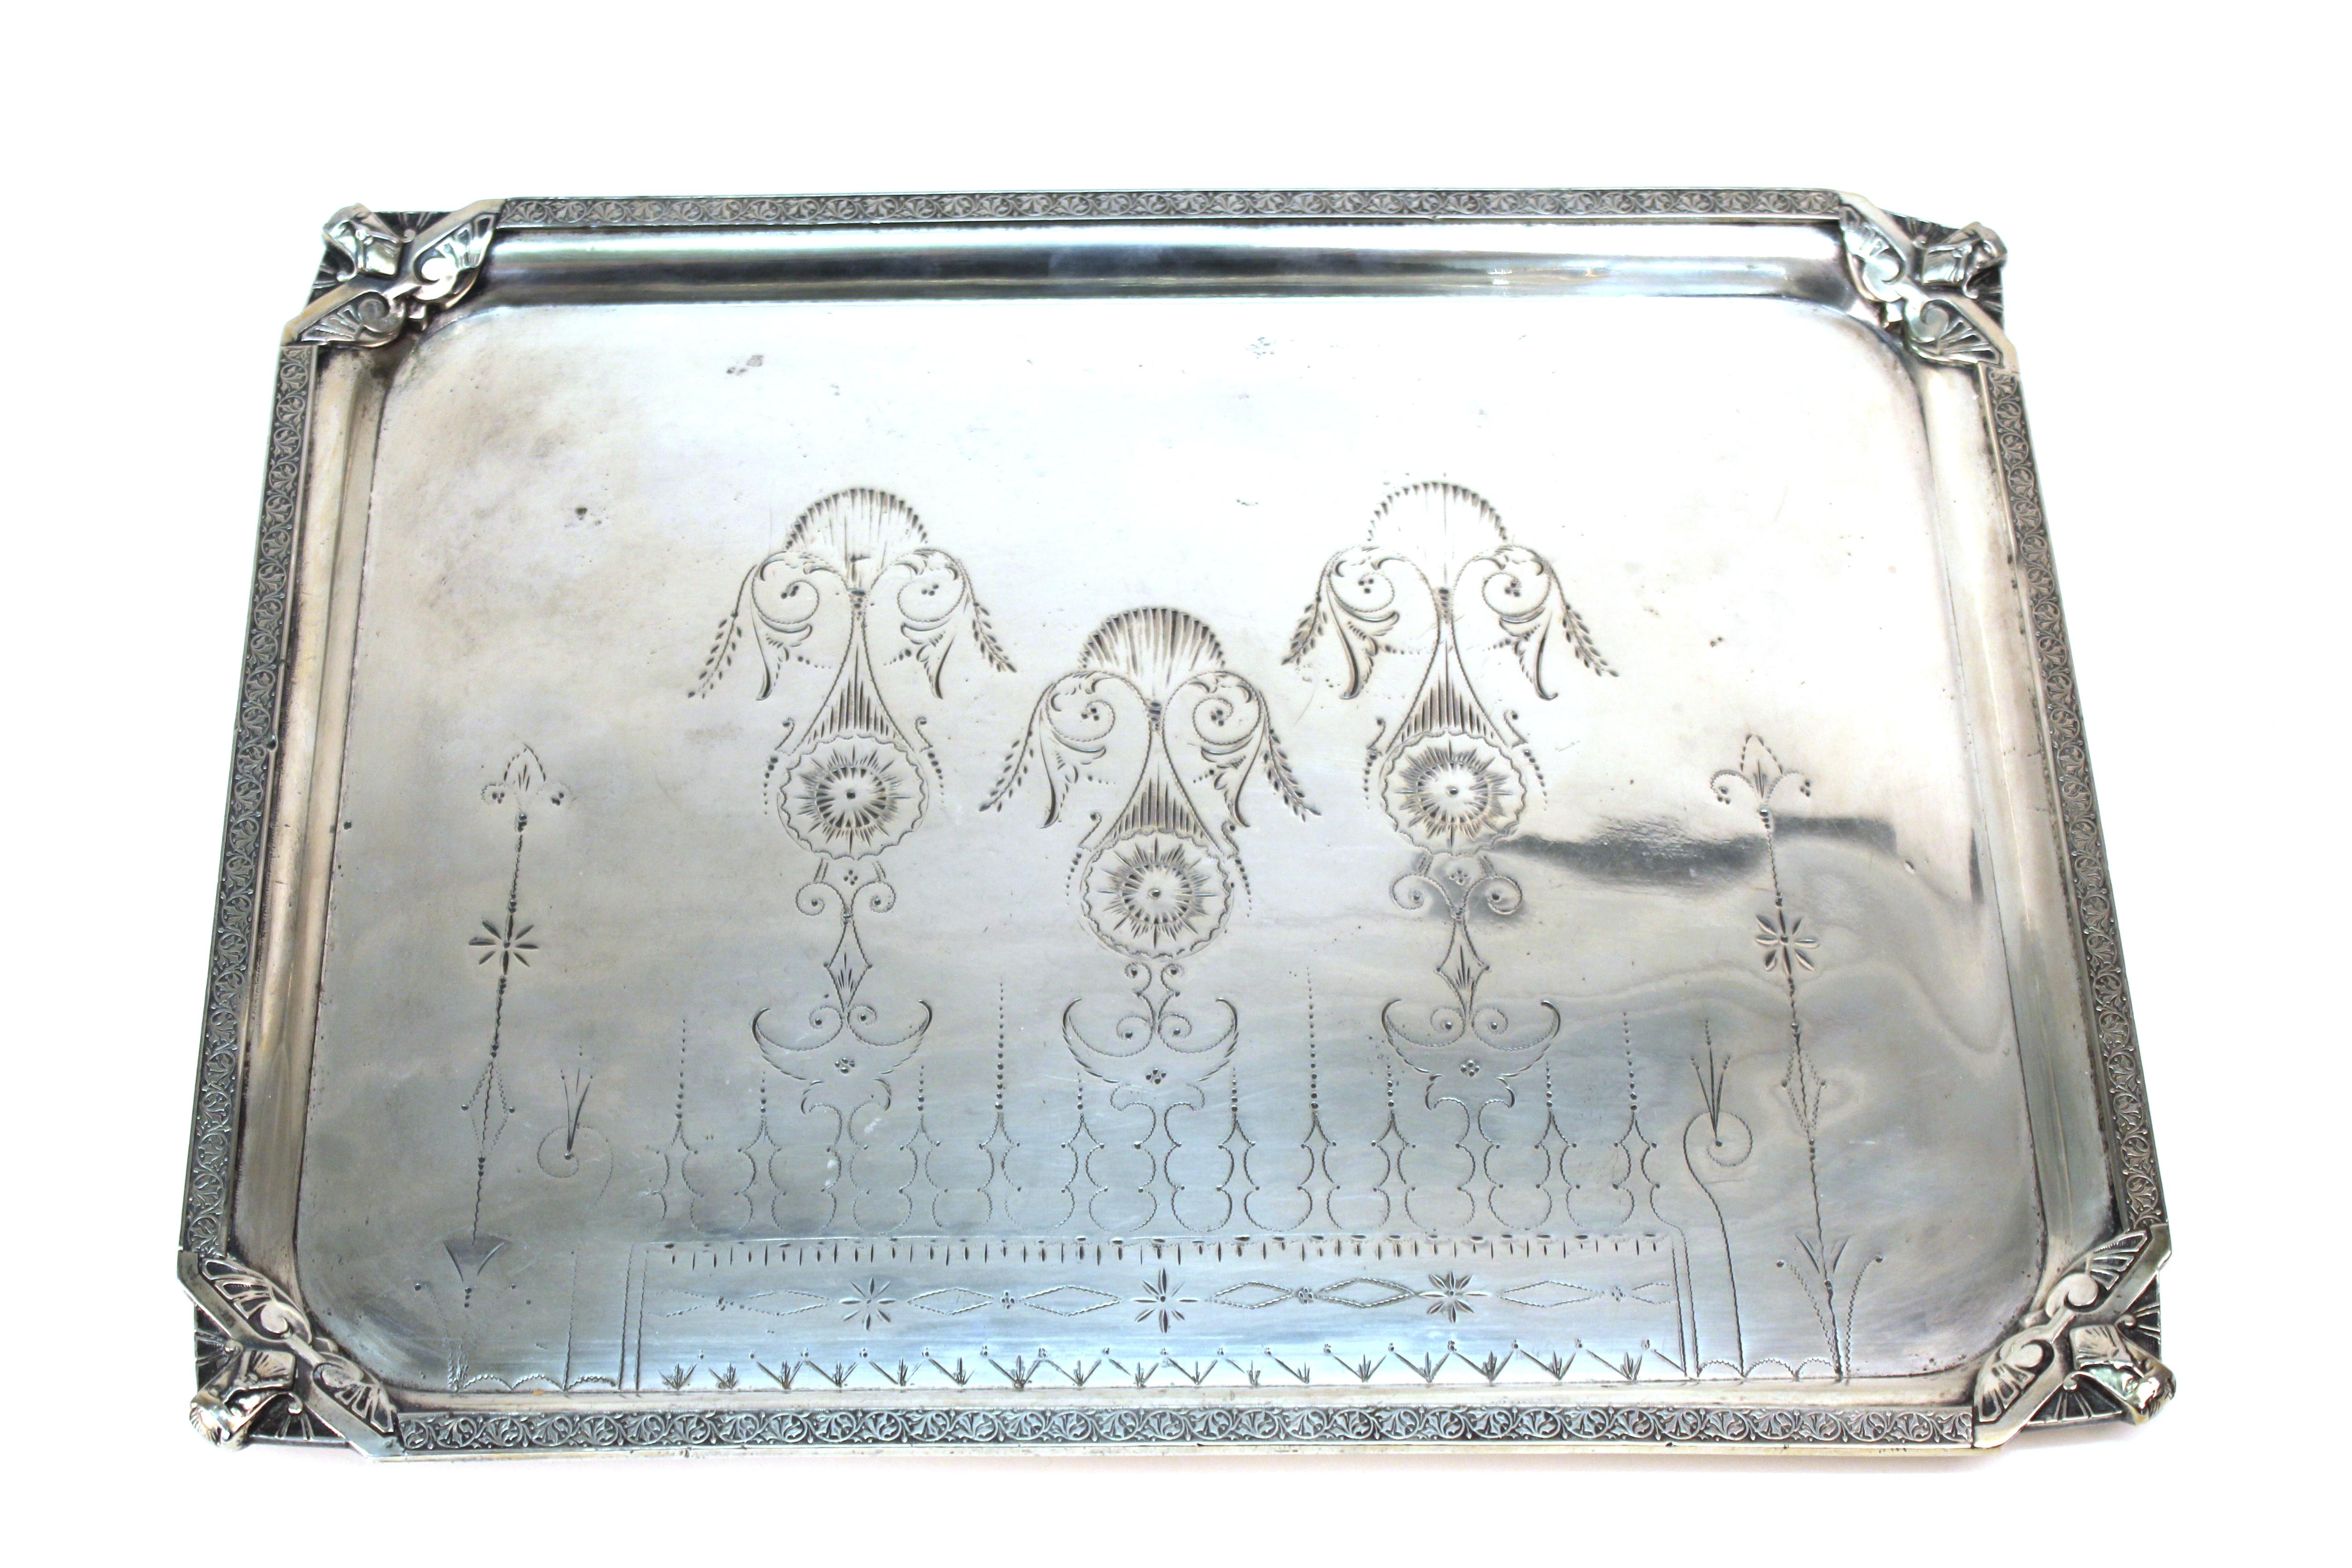 English Victorian silver plated tray with elaborate engraving made by Homan Silver Plate Company. The piece has decorative mascarons in each corner and is likely made in the late 19th century. In great antique condition with age-appropriate wear and